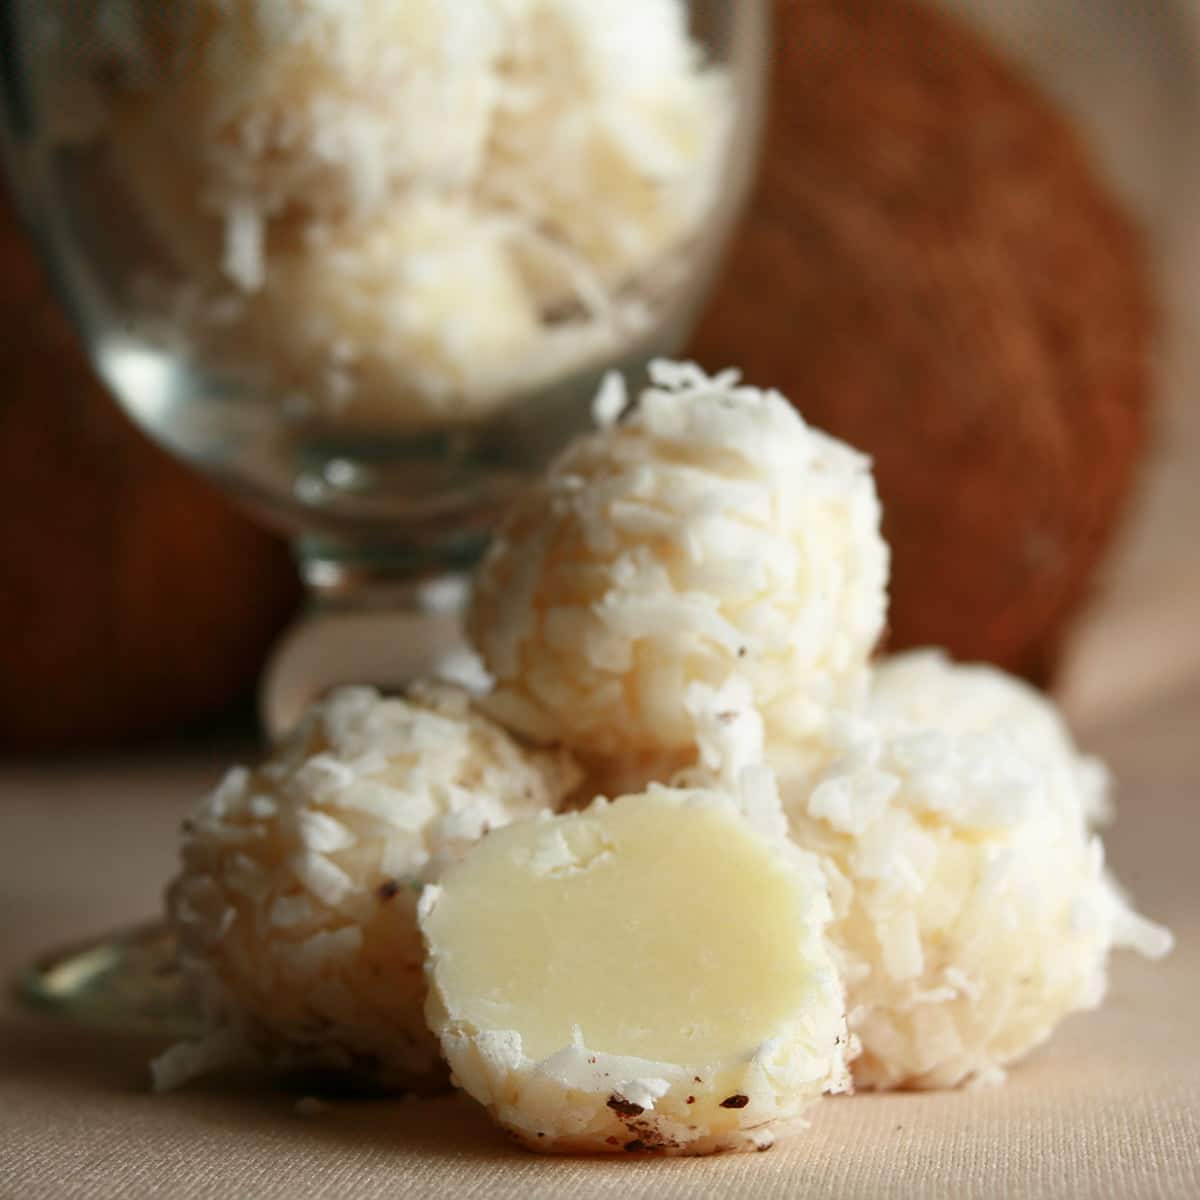 Several Tropical White Chocolate Truffles are piled at the base of a cocktail glass. More truffles are contained within the glass, and there is a coconut behind it.